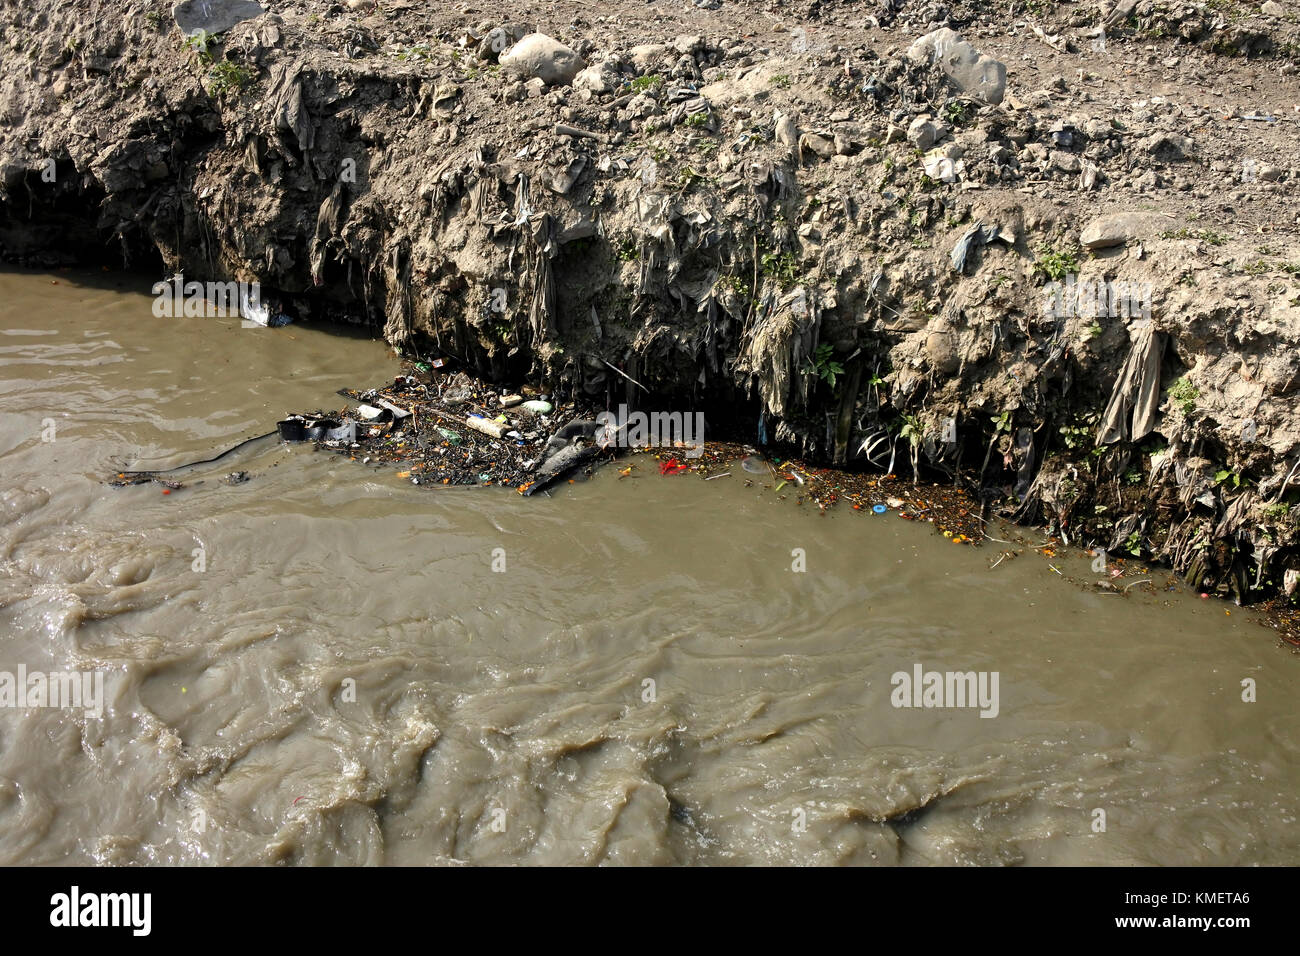 Mounts of plastic bags, dust and build up over many years in a river bed Stock Photo